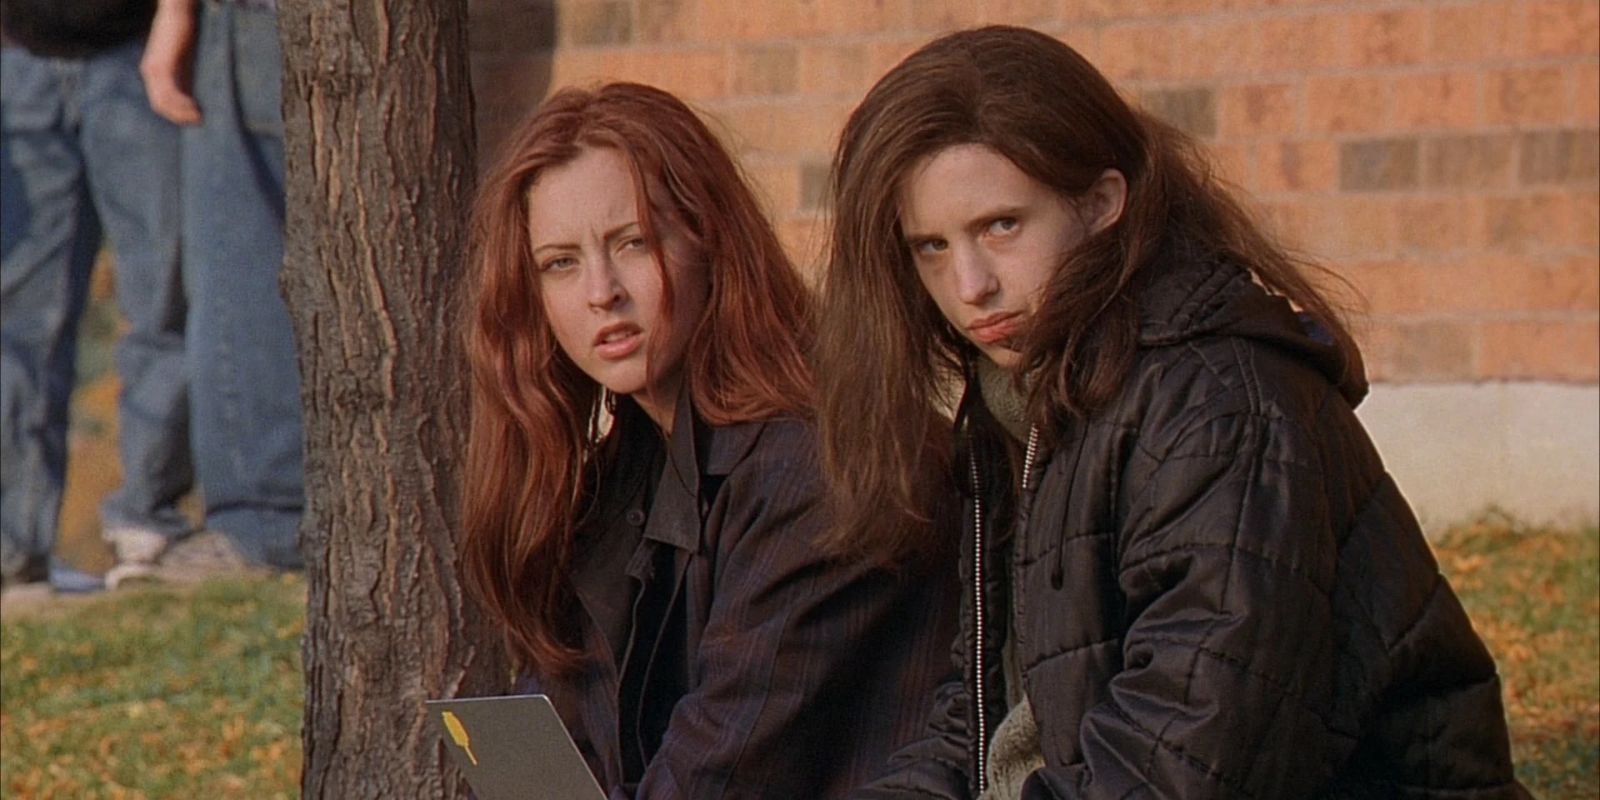 Ginger and Brigitte awkwardly staring at school in Ginger Snaps movie.